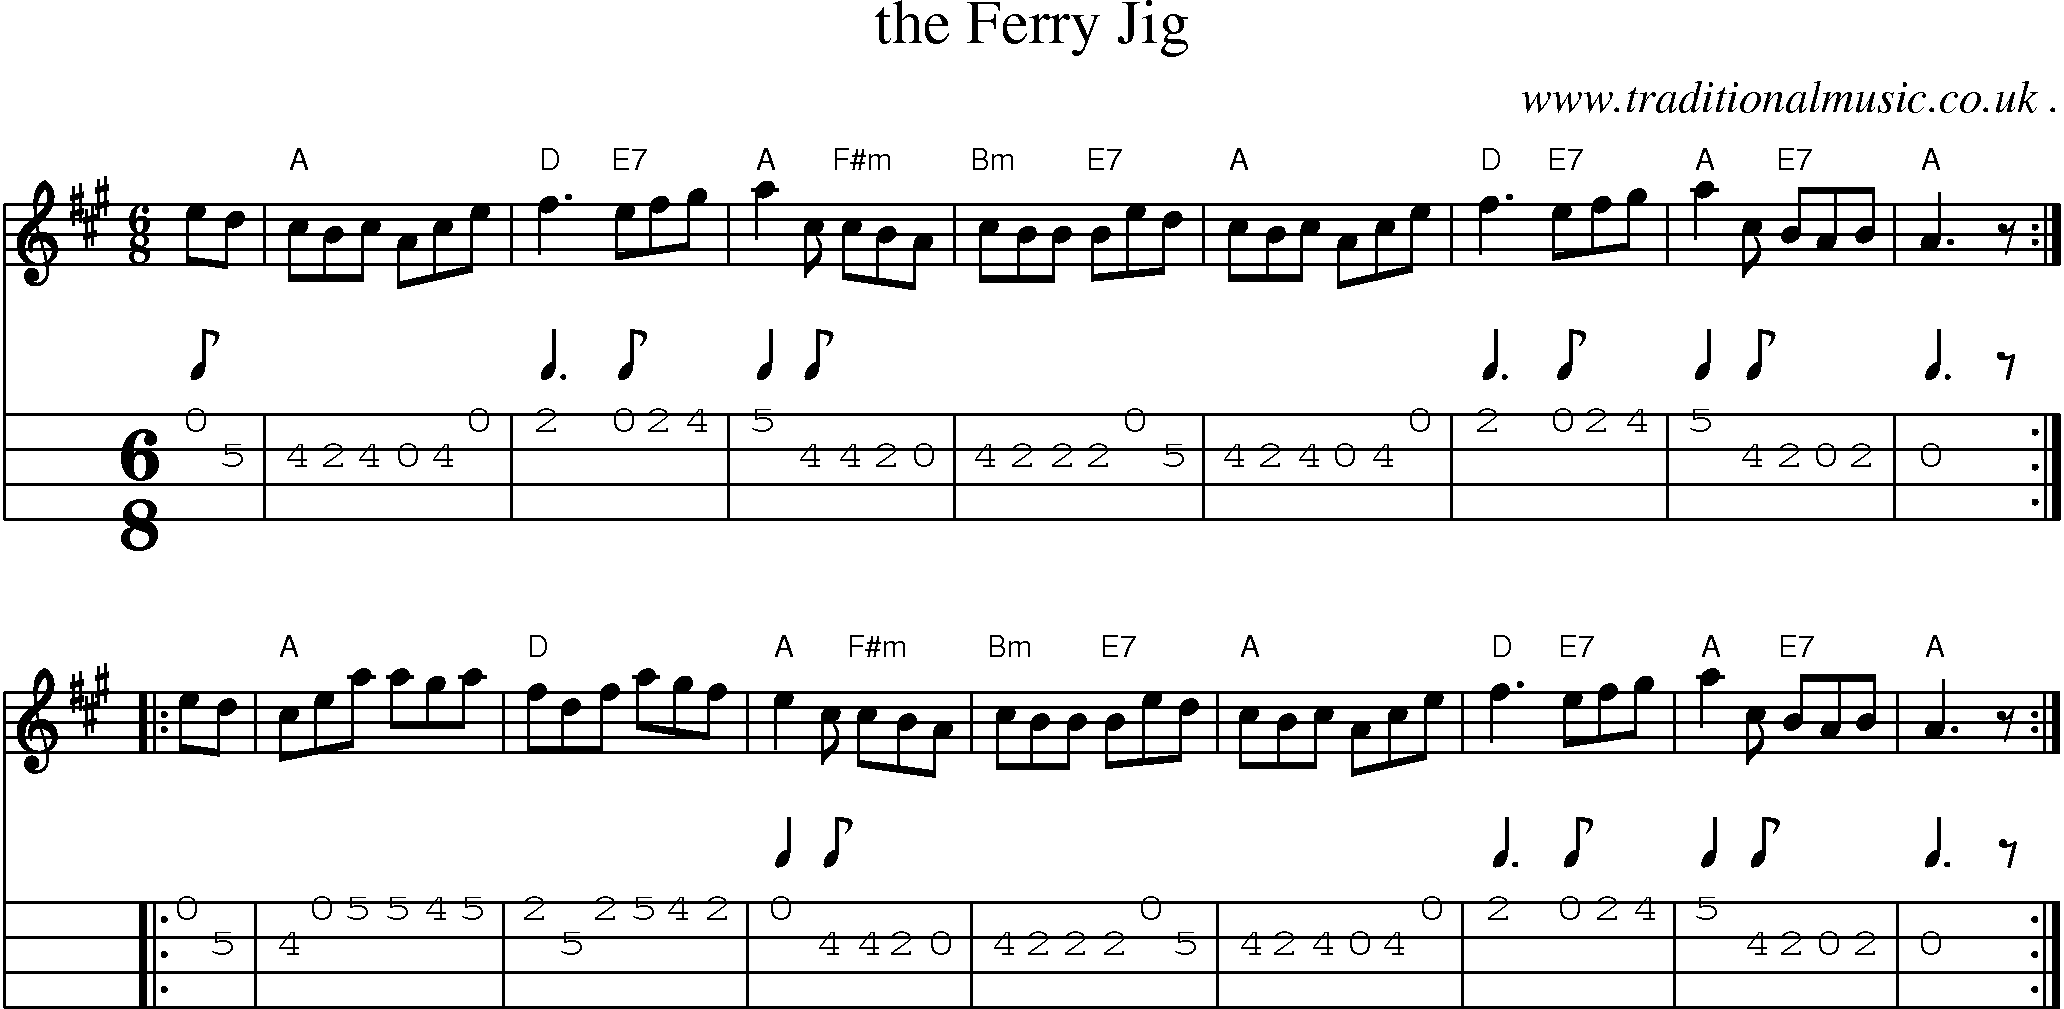 Sheet-music  score, Chords and Mandolin Tabs for The Ferry Jig